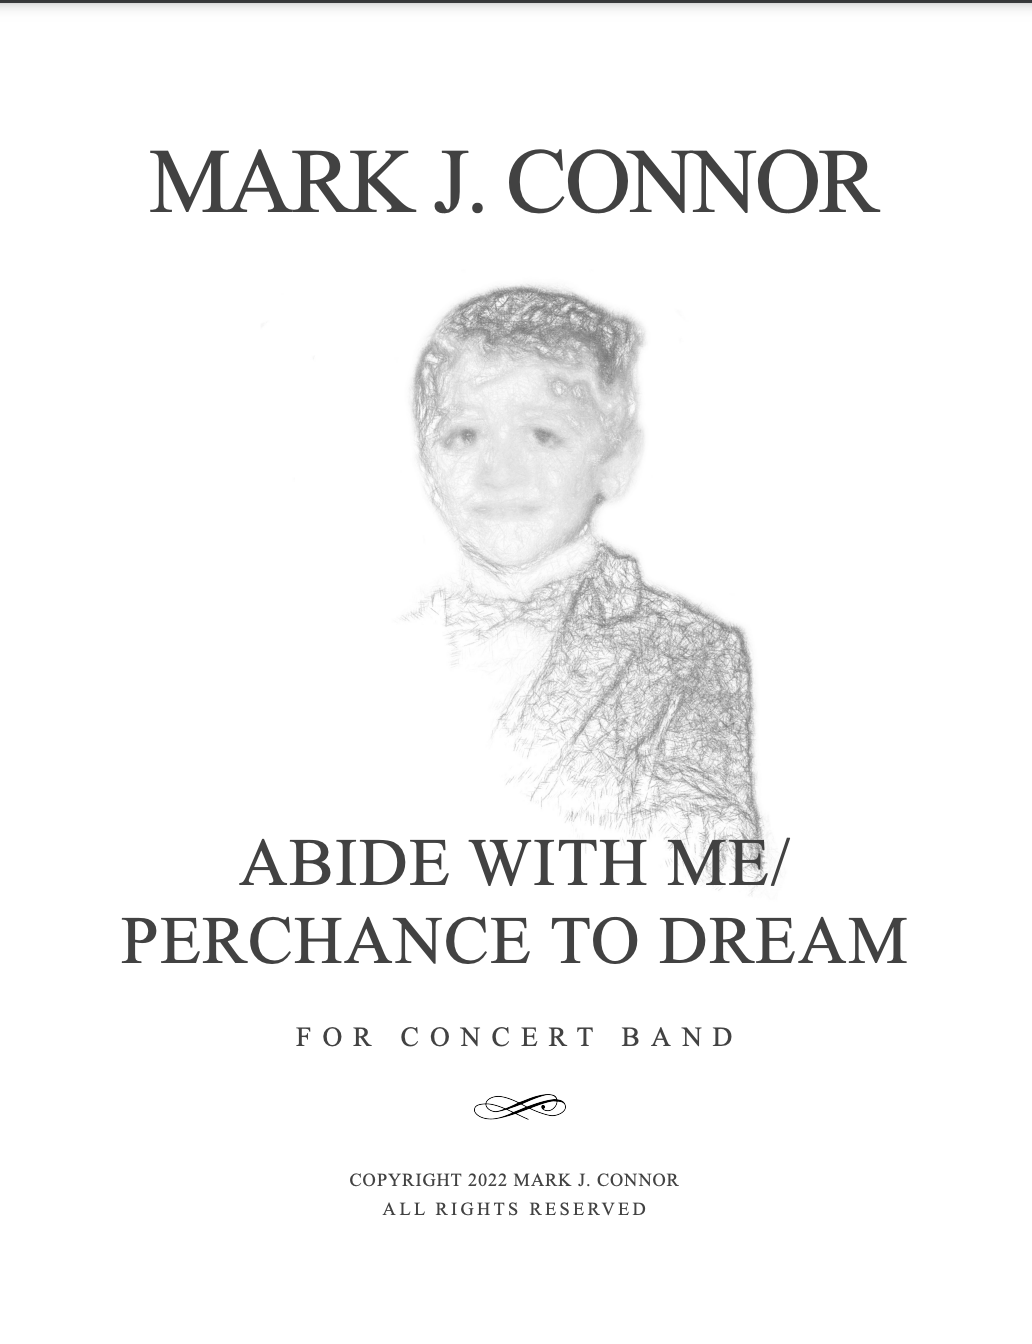 Abide With Me/Perchance To Dream (Score Only) by Mark Connor